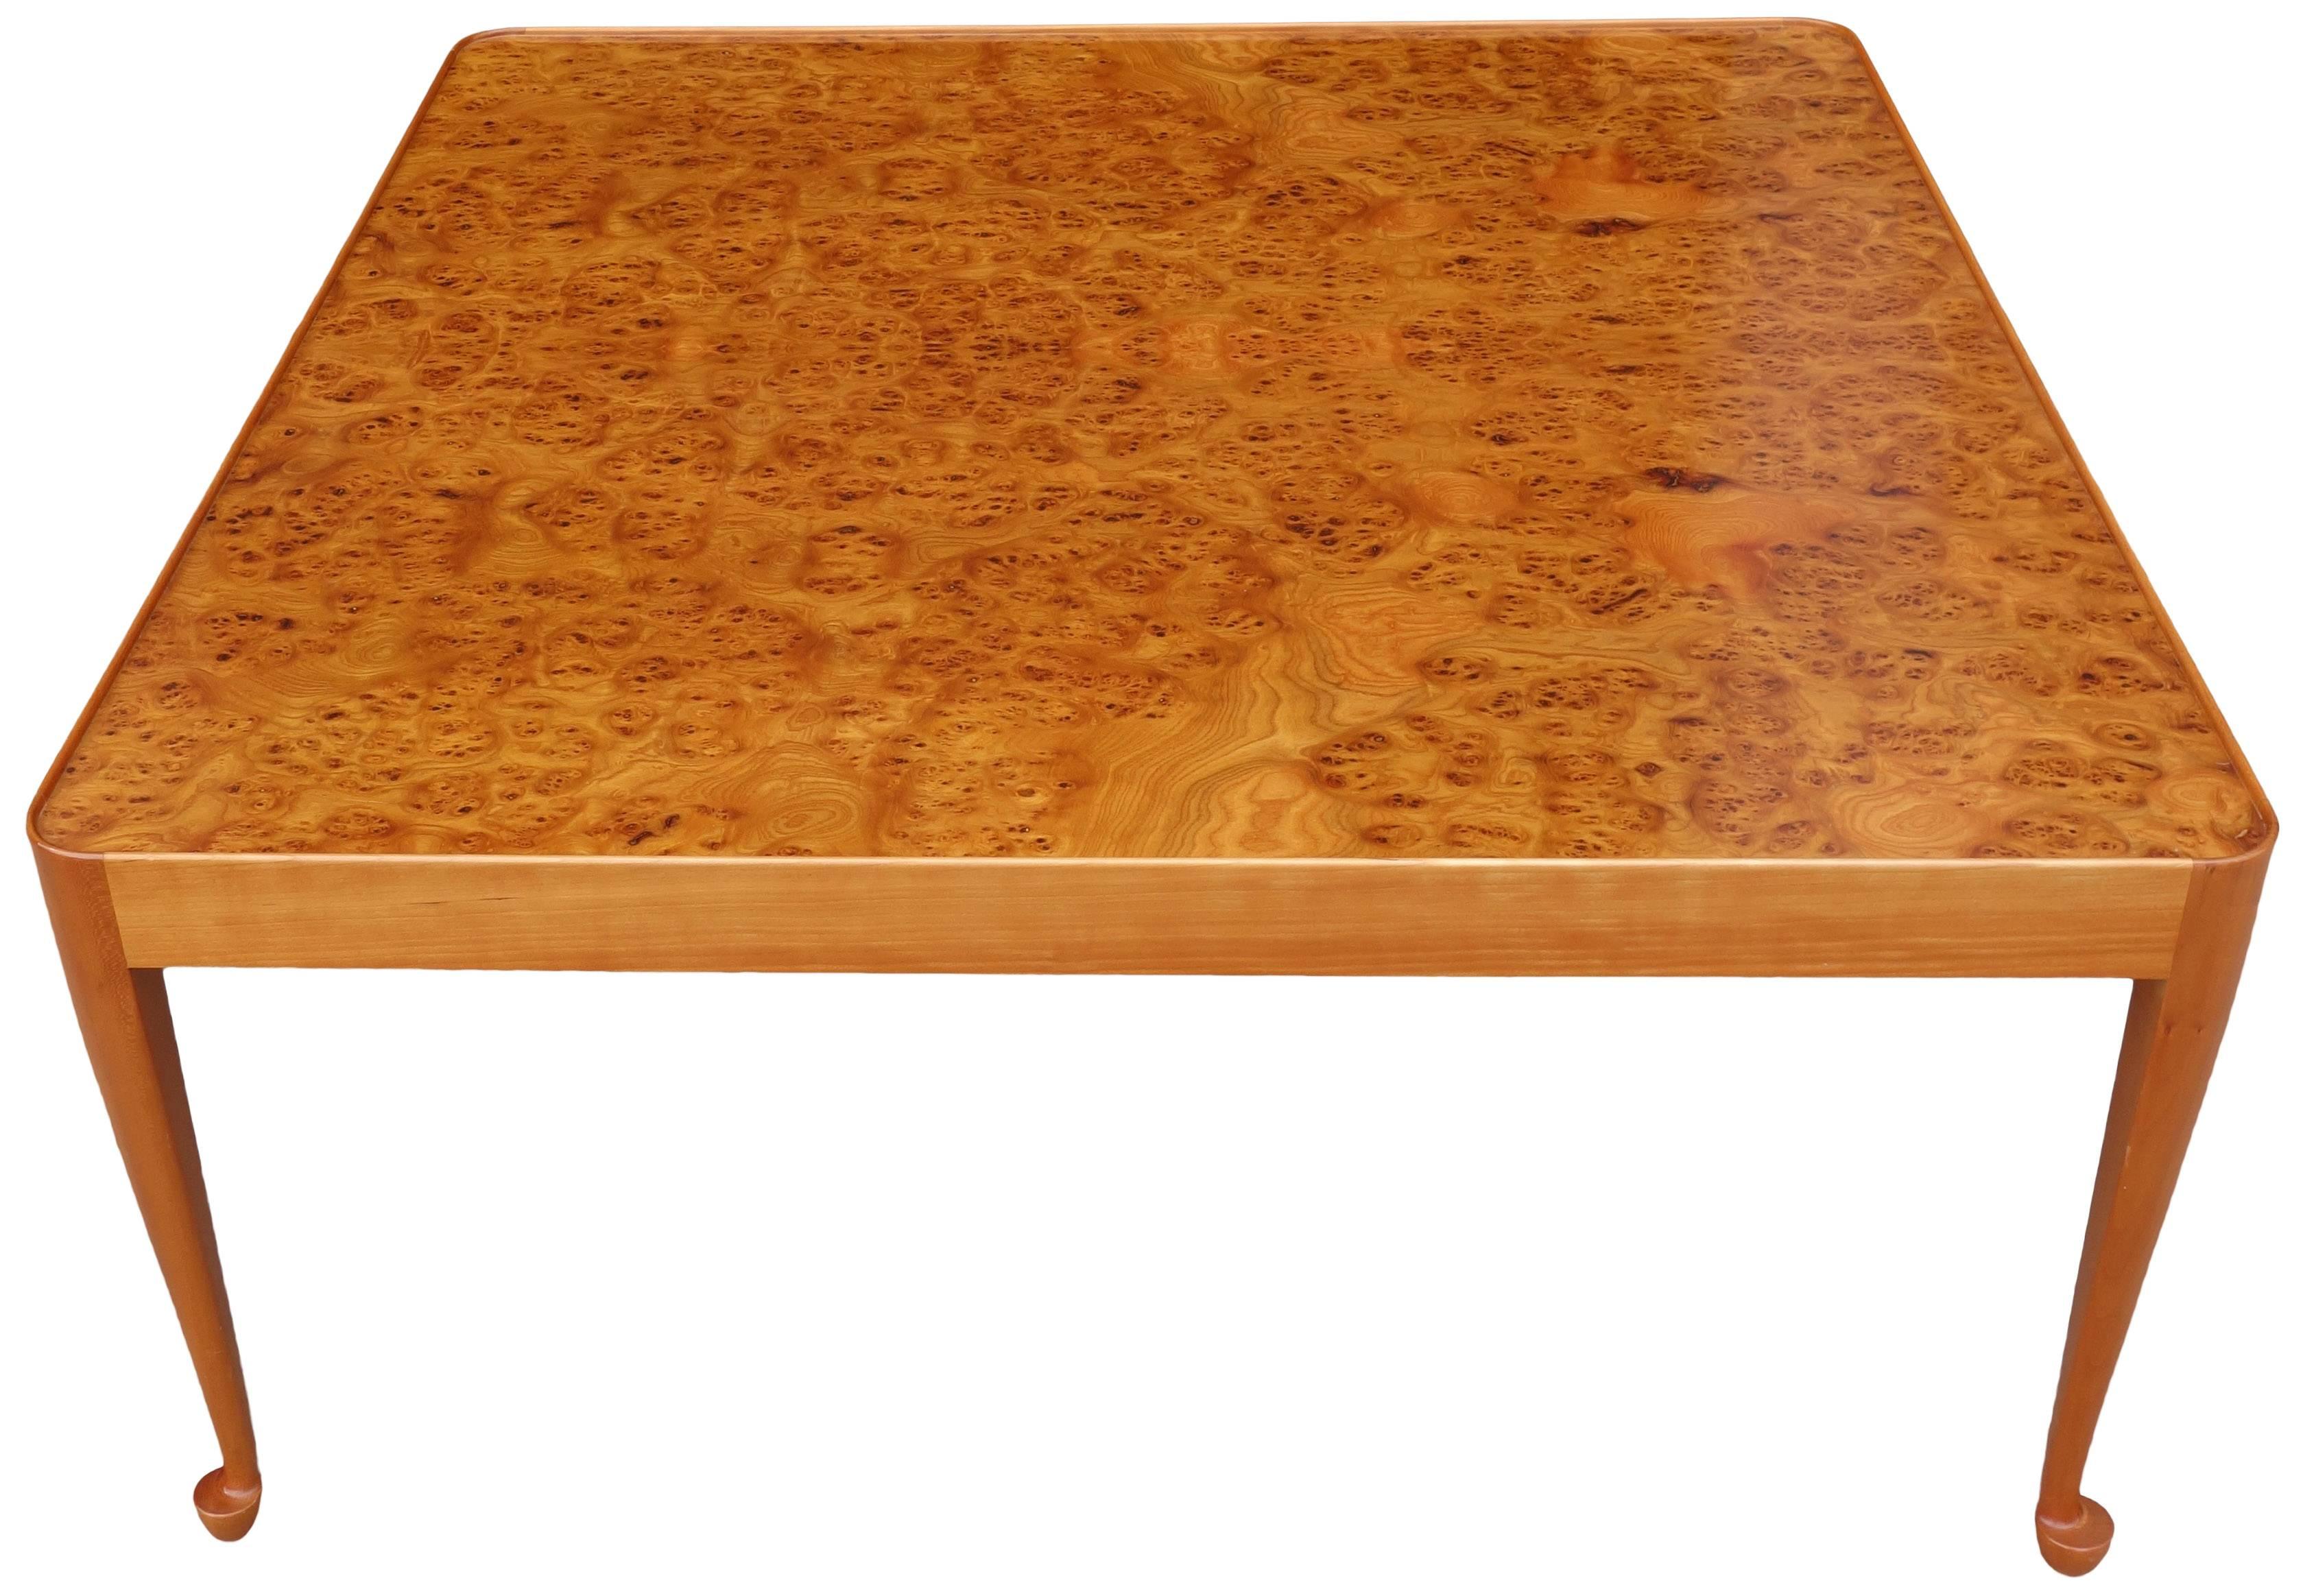 Exceptional Mid-Century burl wood coffee or low table by Josef Frank.
Featuring highly figured burl wood. Impeccable workmanship and the finest materials make this perfectly designed table a one of a kind.